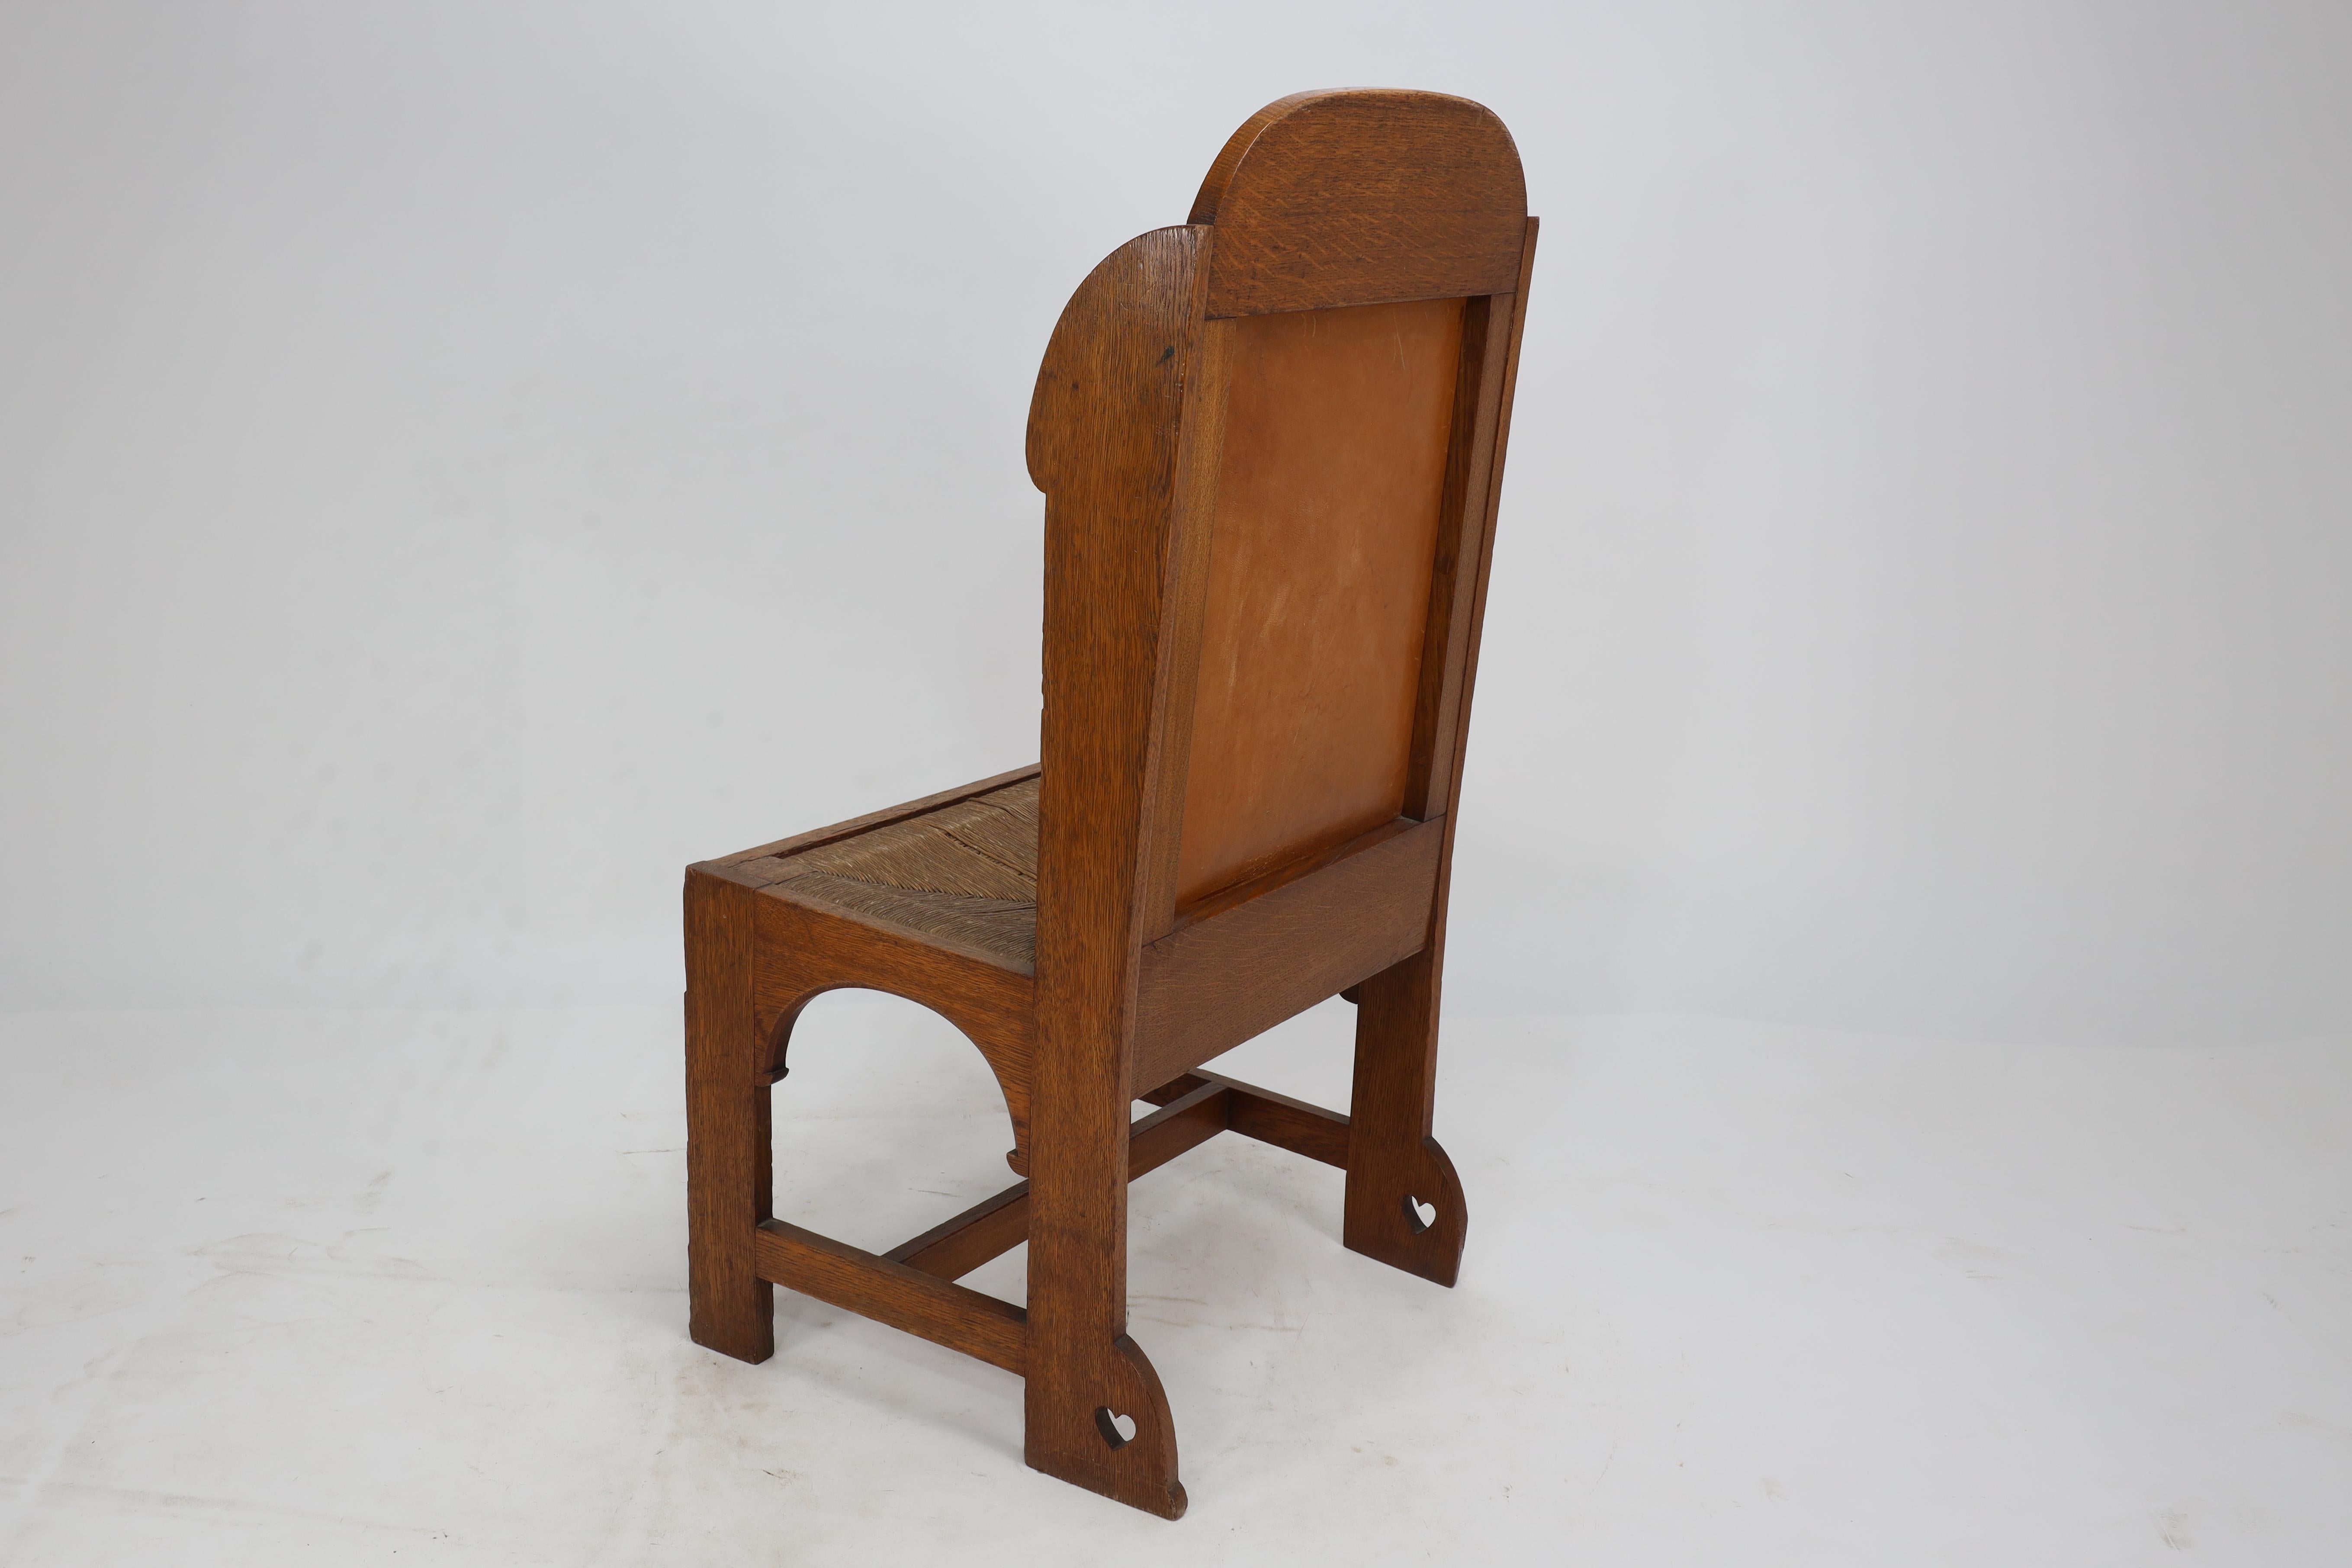 E G Punnet attributed. Probably made by William Birch. An oak wing back chair For Sale 12